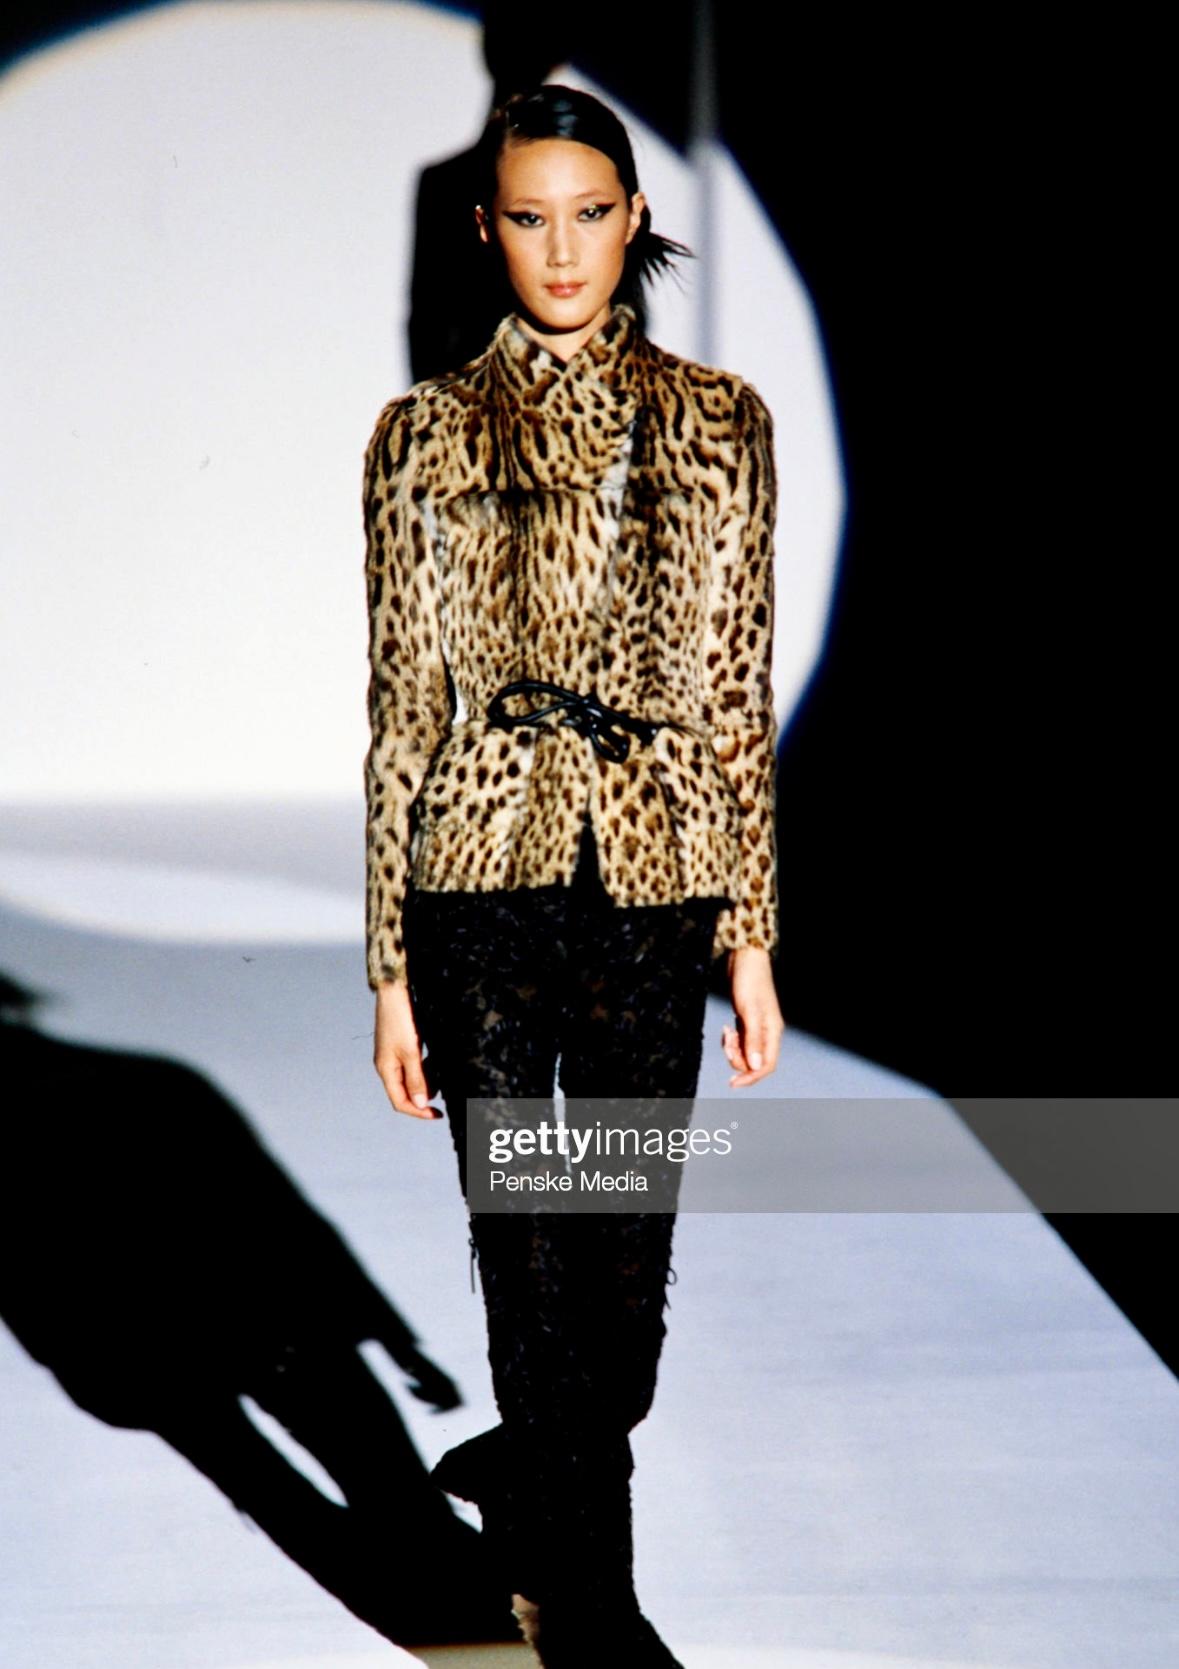 Presenting an incredible leopard print Gucci fur coat, designed by Tom Ford. From the Fall/Winter 1999 collection, this coat debuted on the season's runway and was also highlighted in the season's ad campaign. Constructed of Chinese genet, this coat